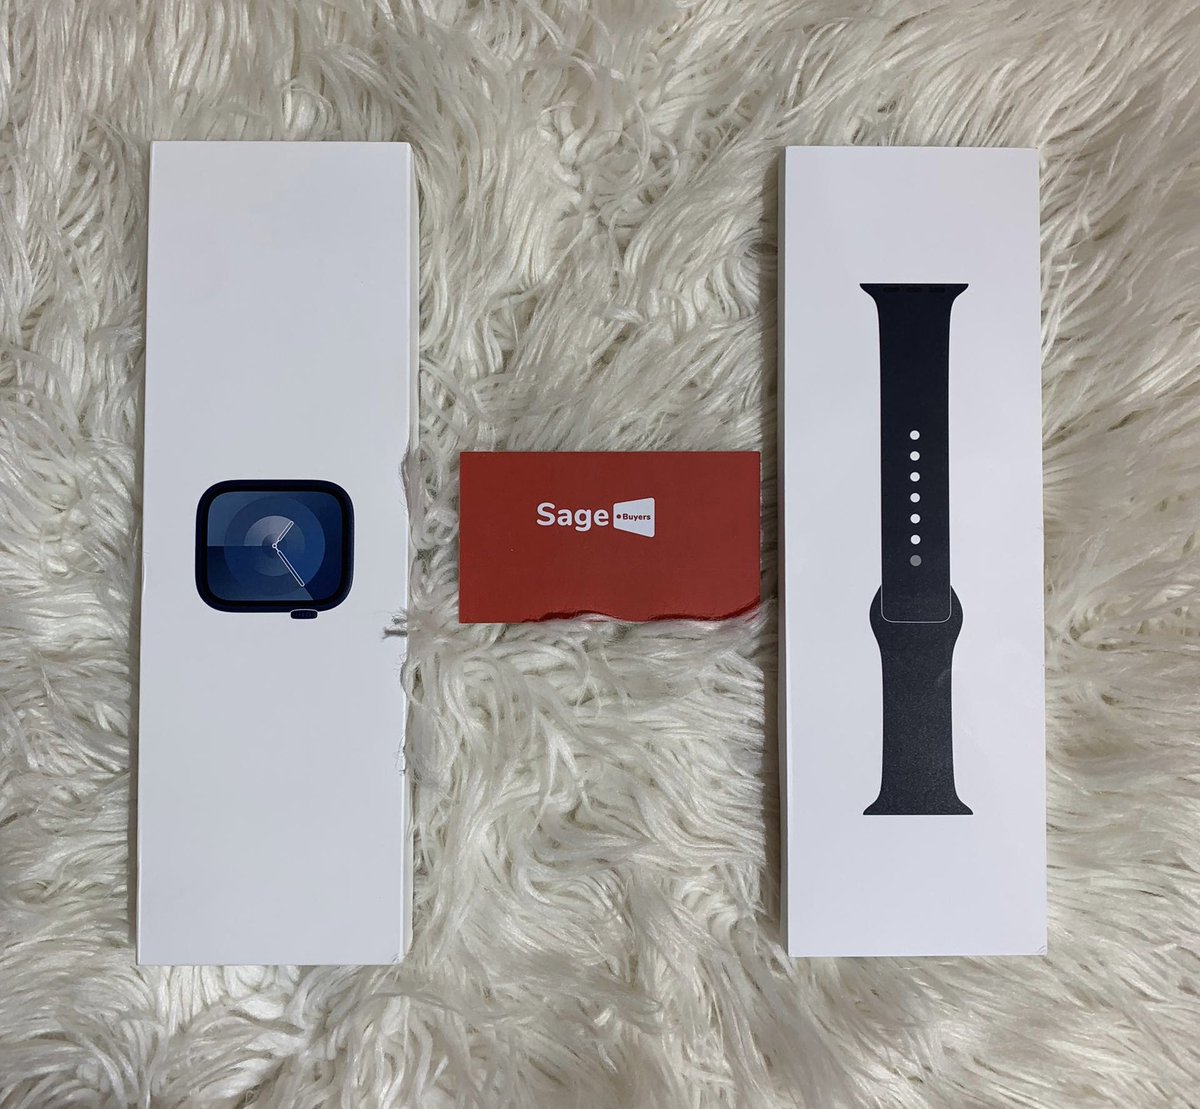 🚨DEAL OF THE DAY!! 🚨

Product: Open box Apple Watch series 9 NON-ACTIVE
Size: 41mm
Price: 1.38M

#SageDay
#SageBuyers